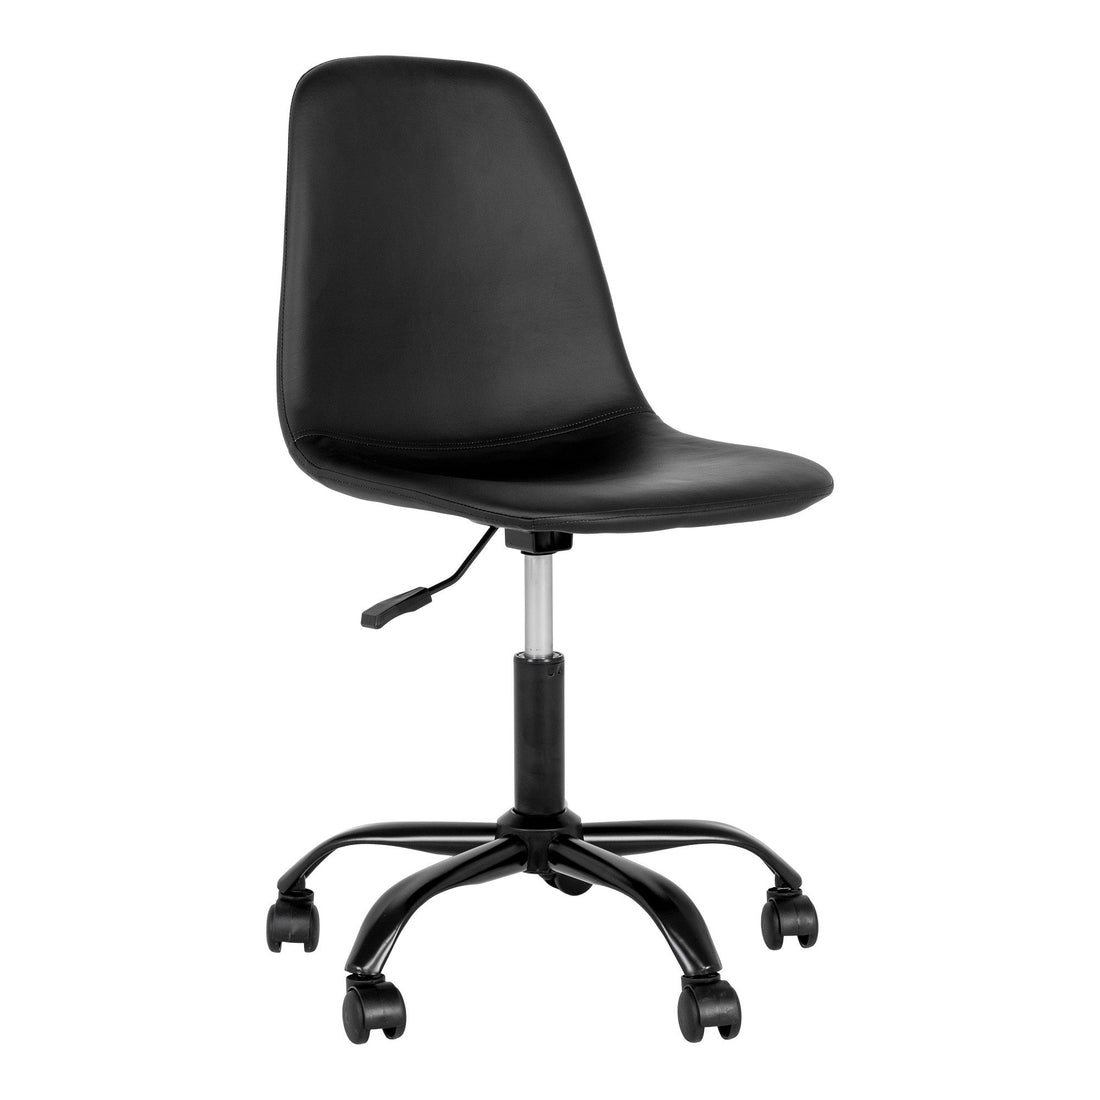 House Nordic - Stockholm office chair